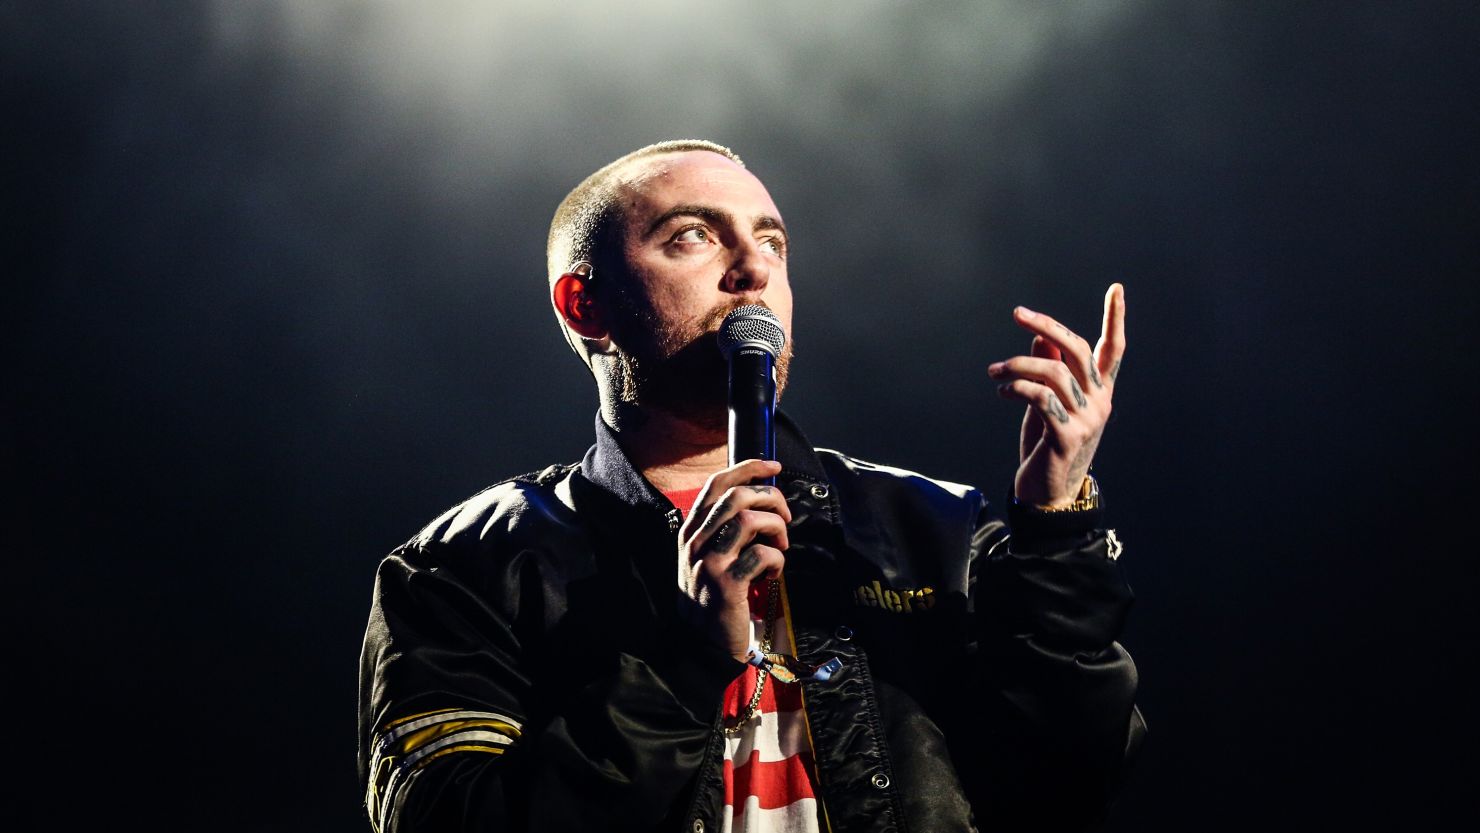 Mac Miller performs on the Camp Stage during day 1 of Camp Flog Gnaw Carnival 2017 at Exposition Park on October 28, 2017 in Los Angeles, California. 